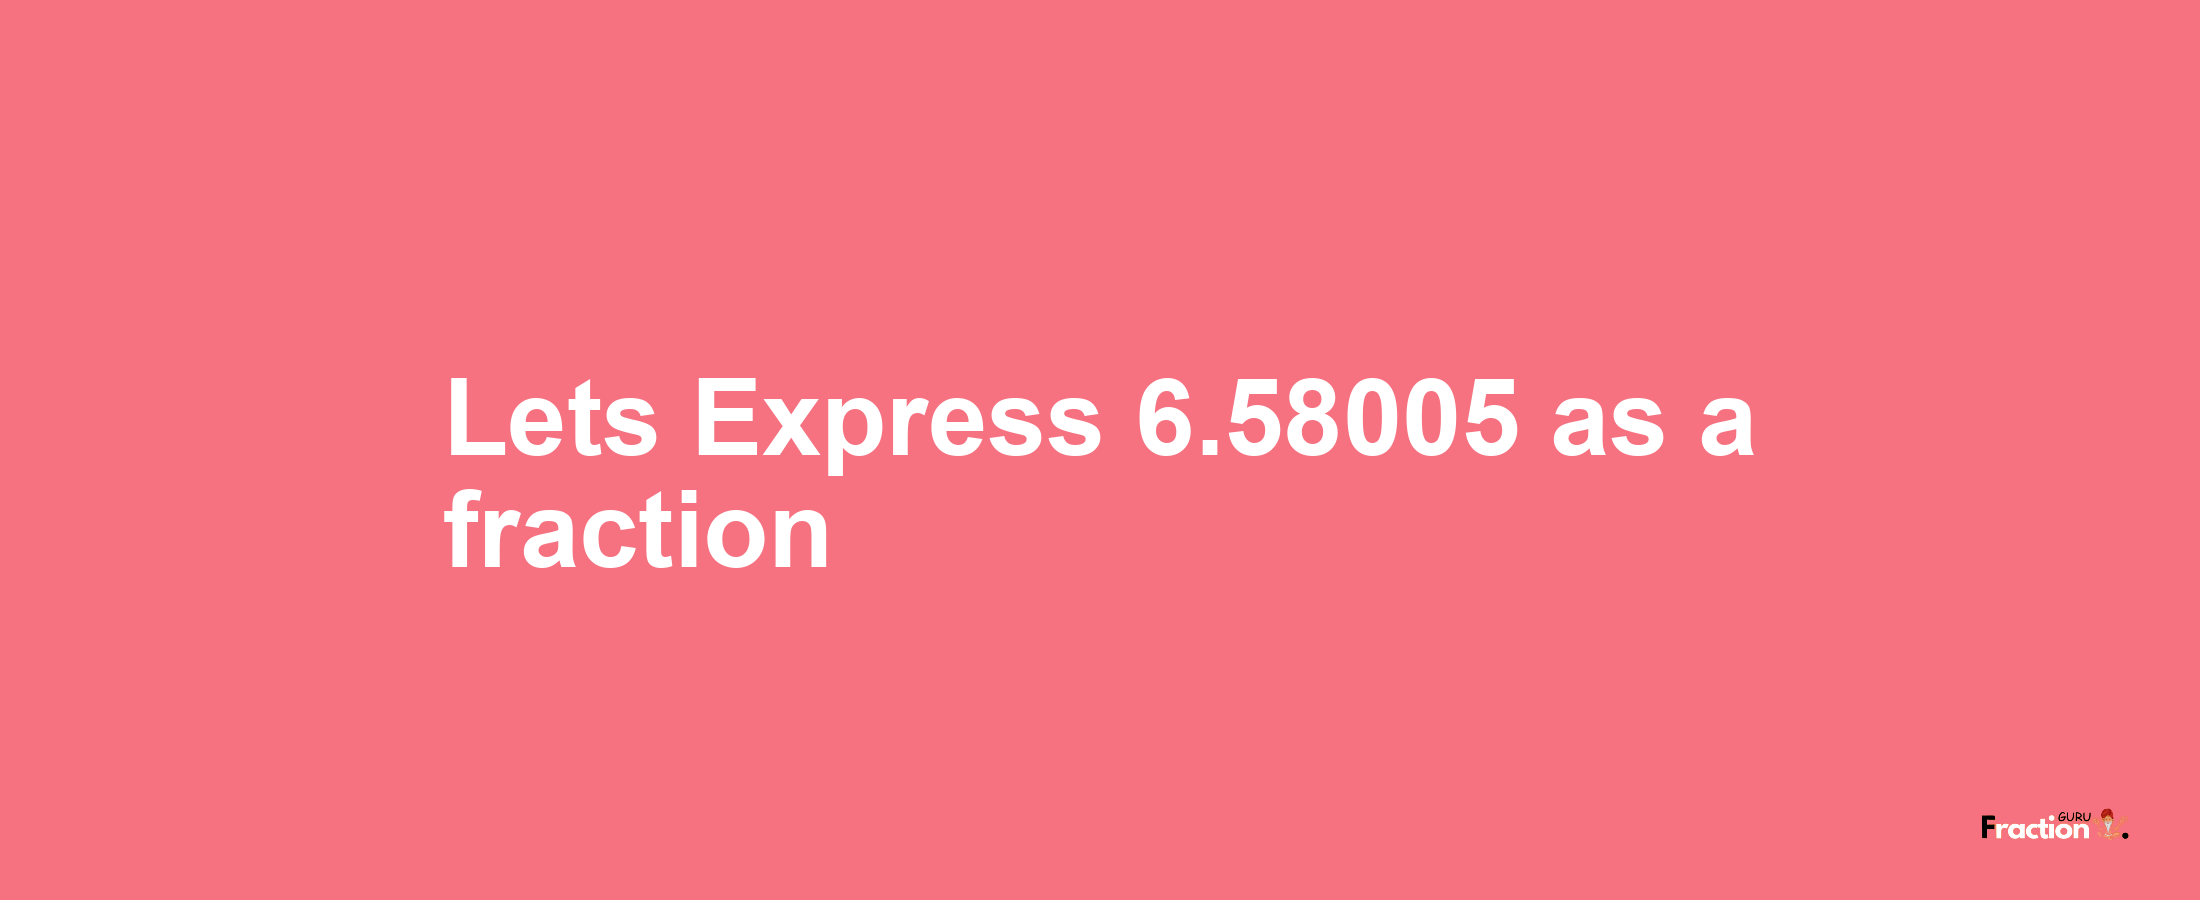 Lets Express 6.58005 as afraction